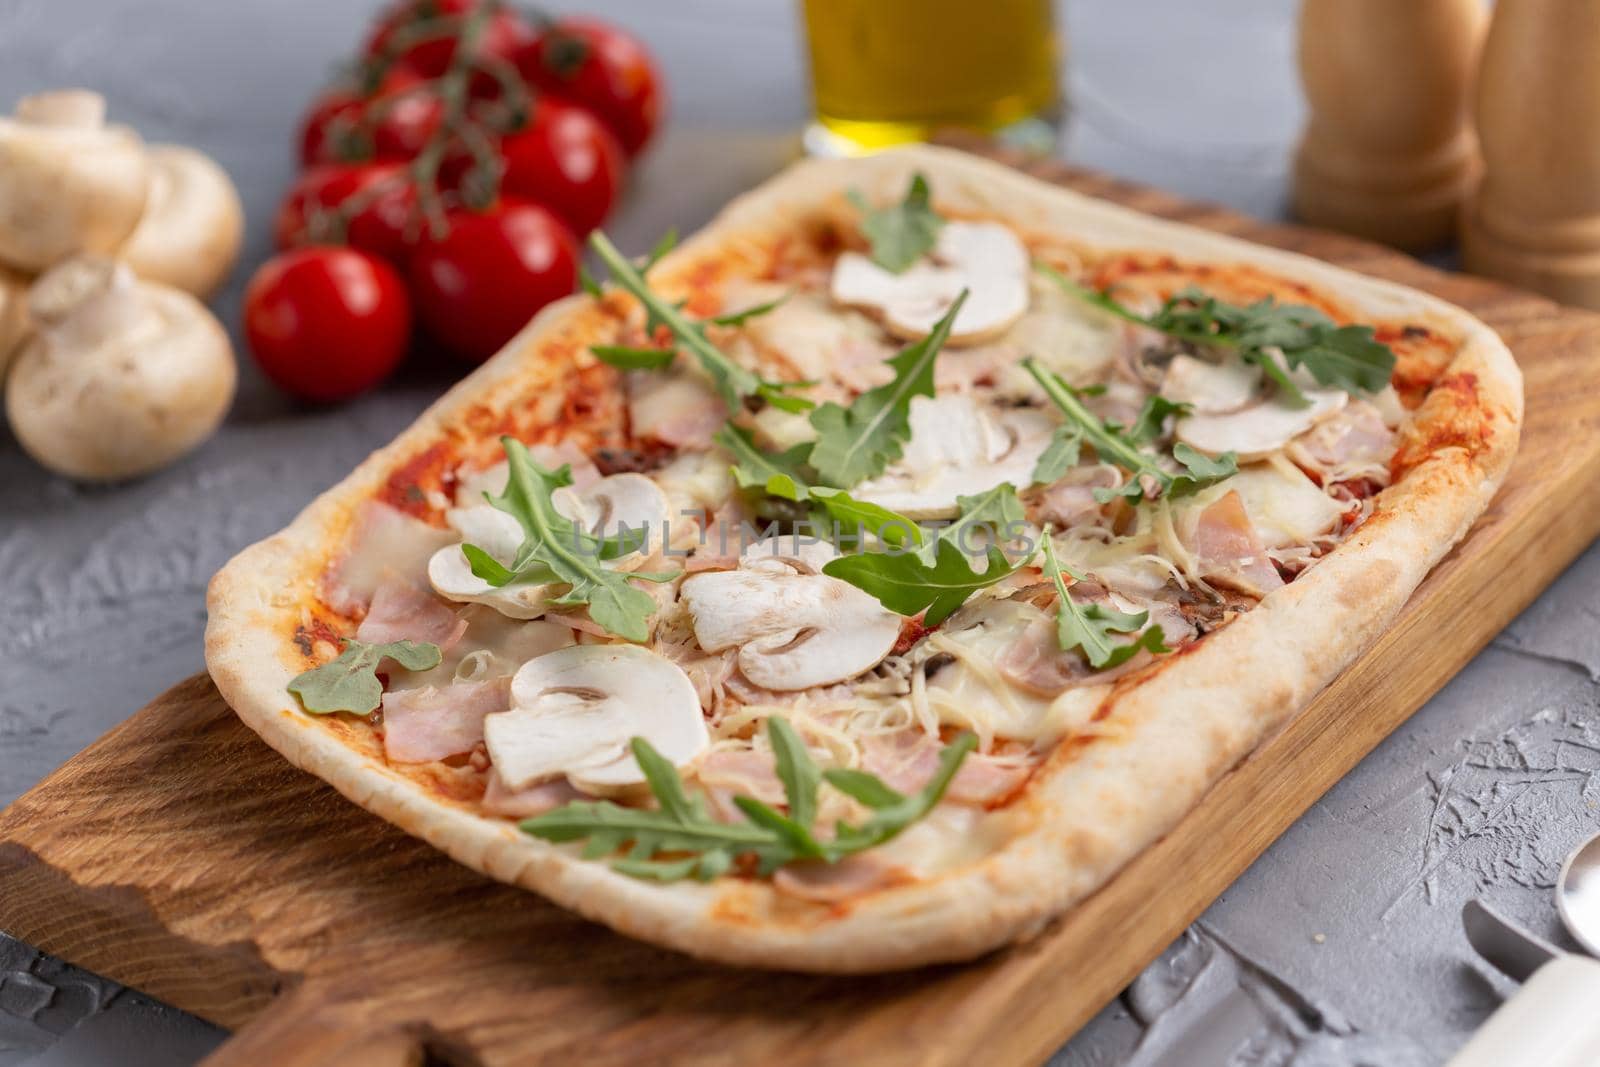 Rectangular pizza with mushrooms, tomatoes and arugula on a wooden cutting board.